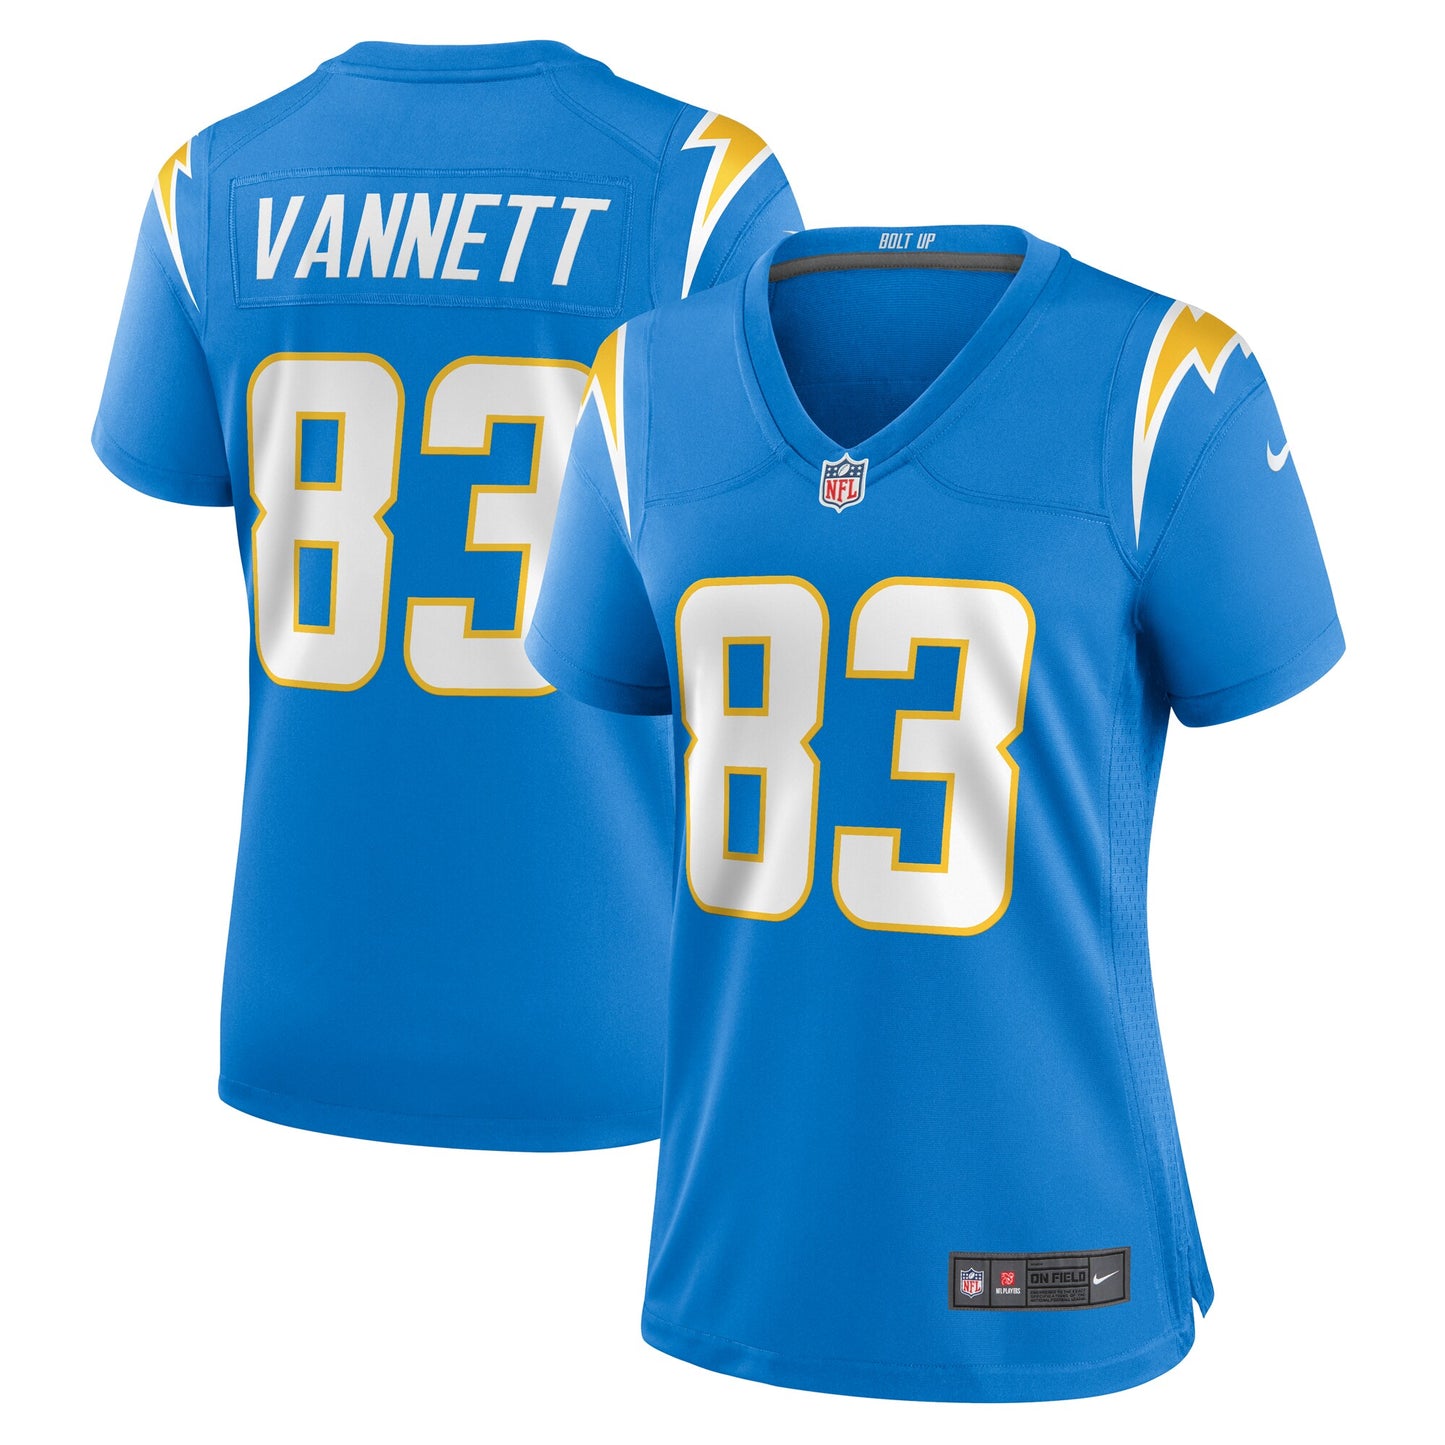 Nick Vannett Los Angeles Chargers Nike Women's Team Game Jersey -  Powder Blue